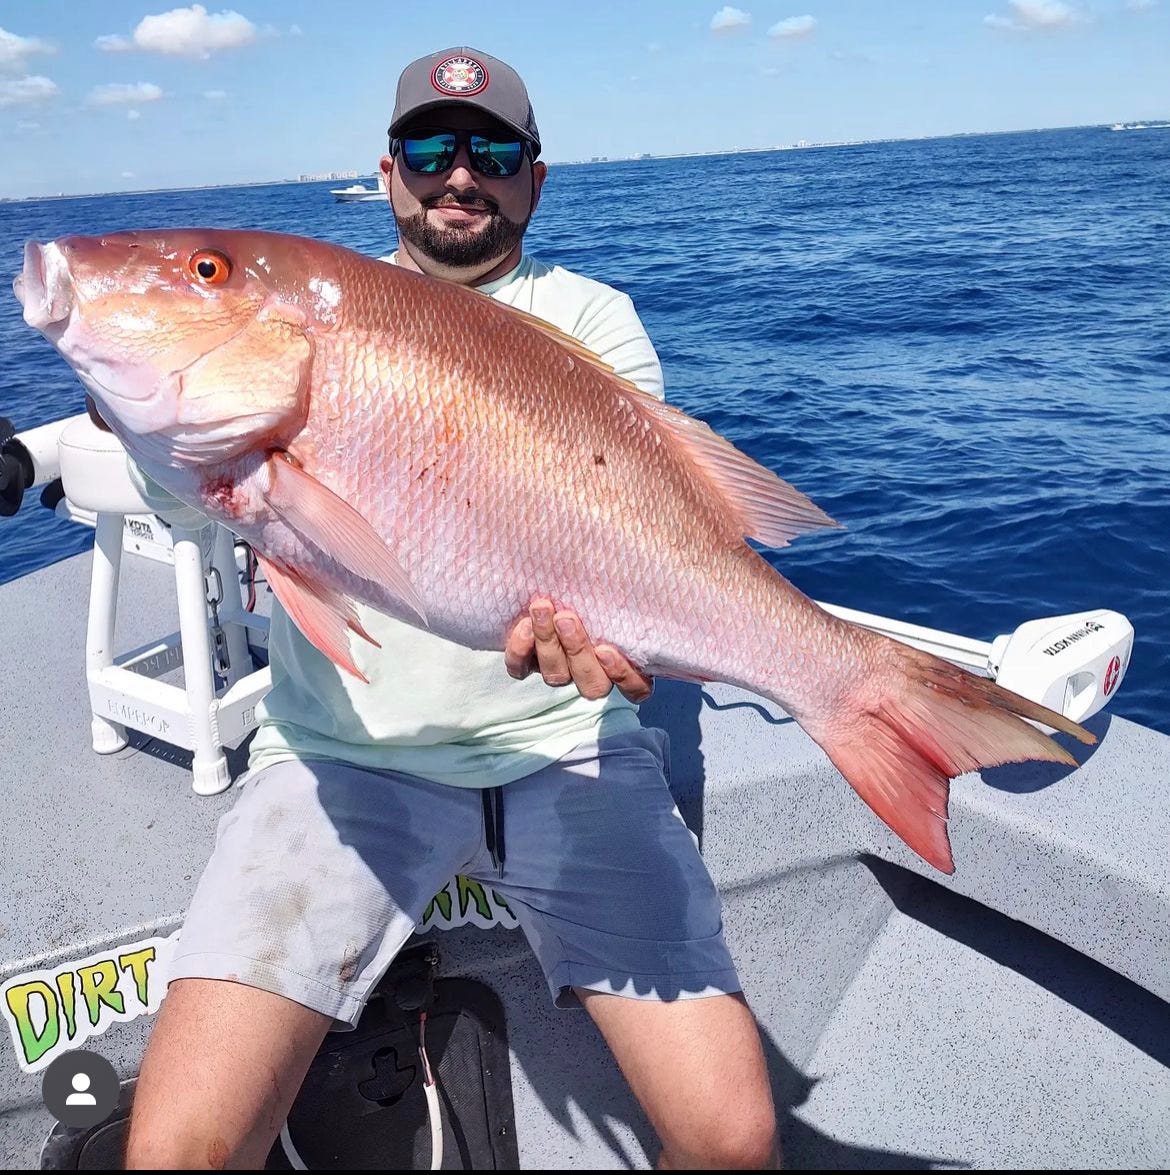 Juno Bait's Weekend Fishing Outlook - by Todd Mitchell